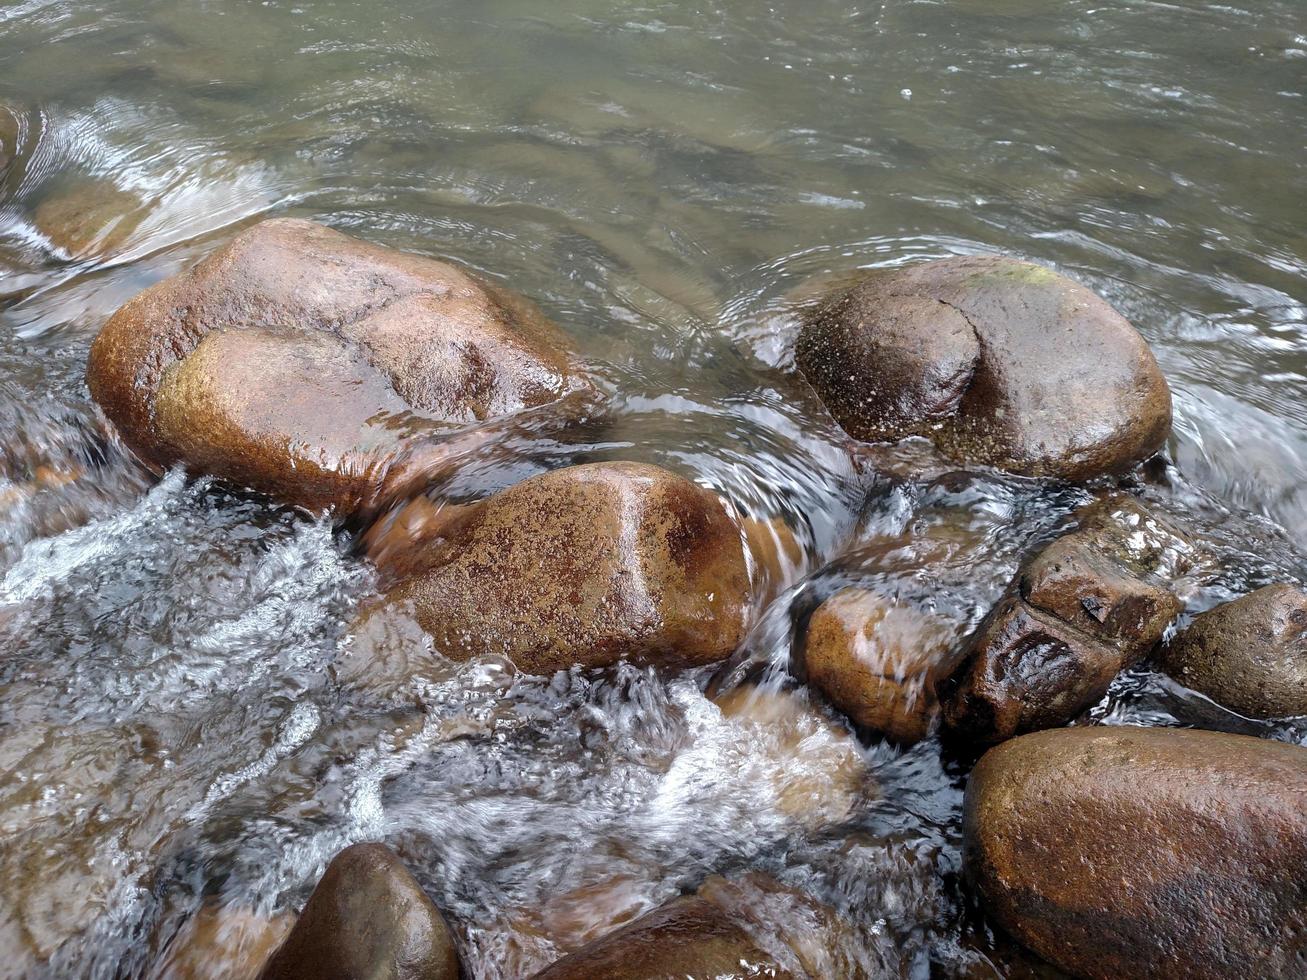 Water flowing over stones Boulders washed by river fluid Amazing water-cascade over natural rocks photo